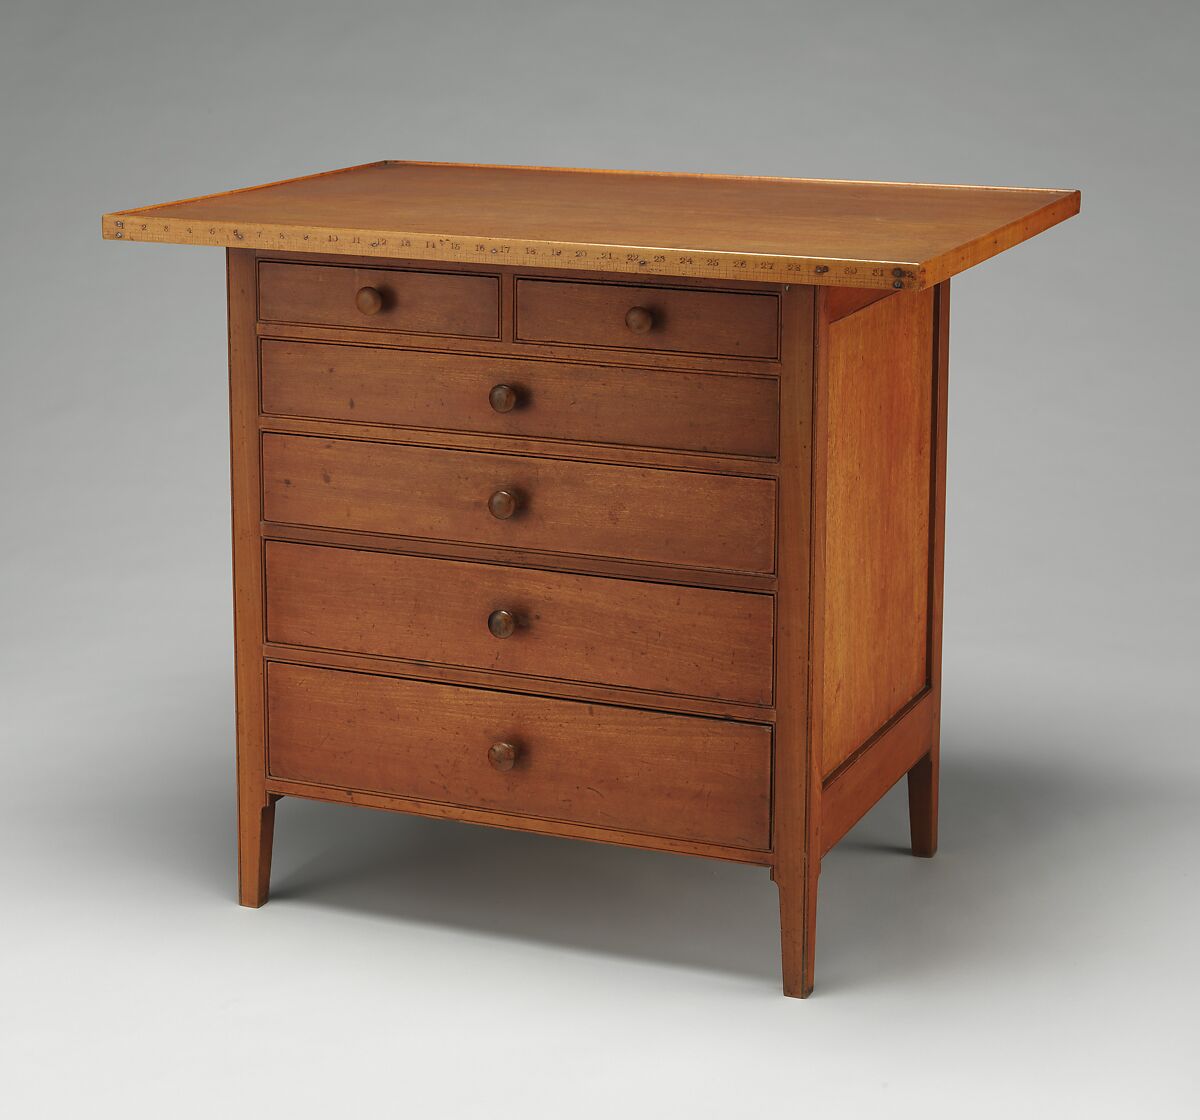 Sewing Table, James X. Smith (1806–1888), Cherry, butternut, pine, basswood, sycamore, maple, American, Shaker 